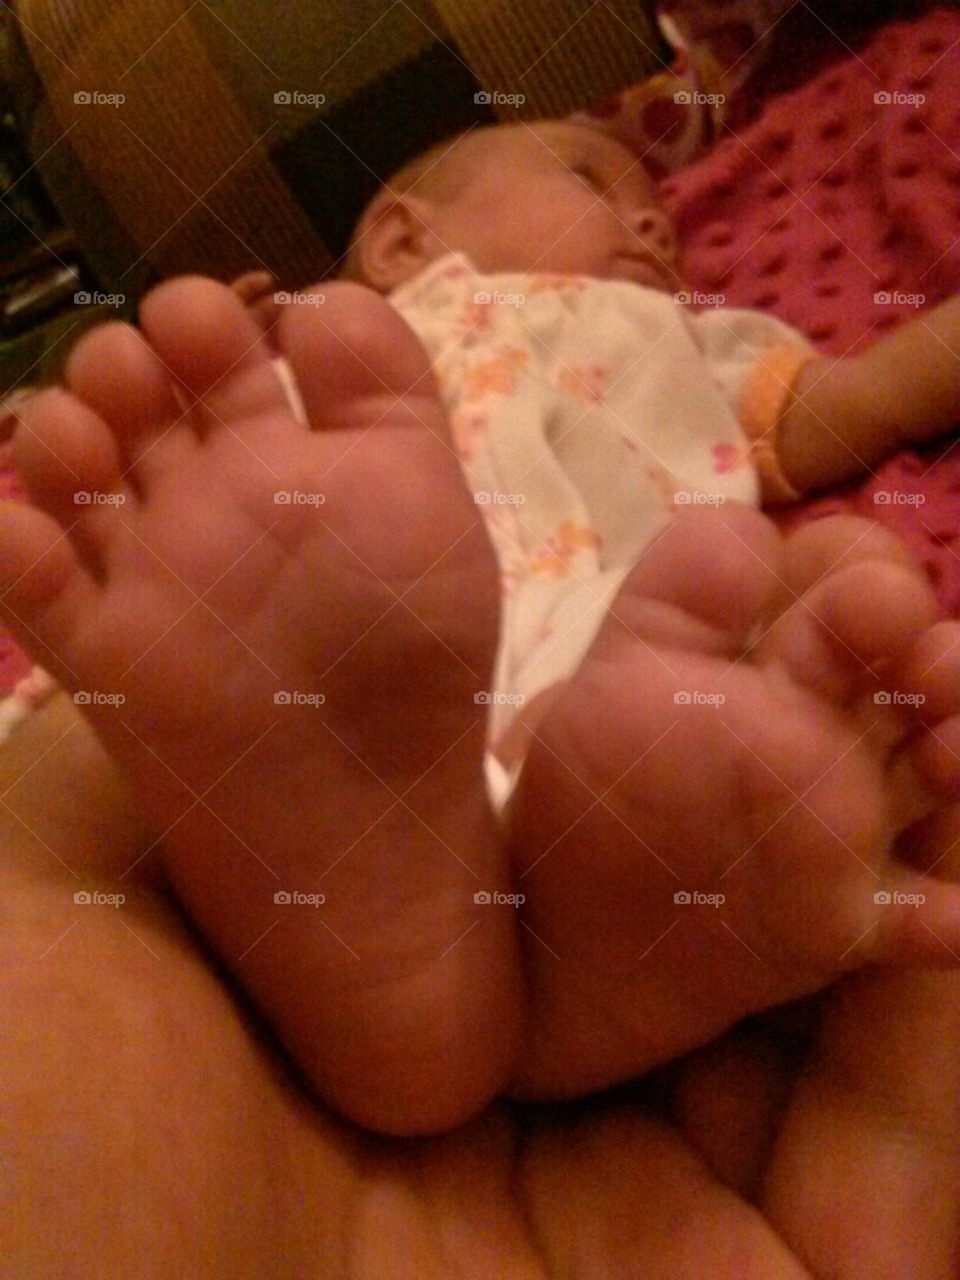 Baby toes!